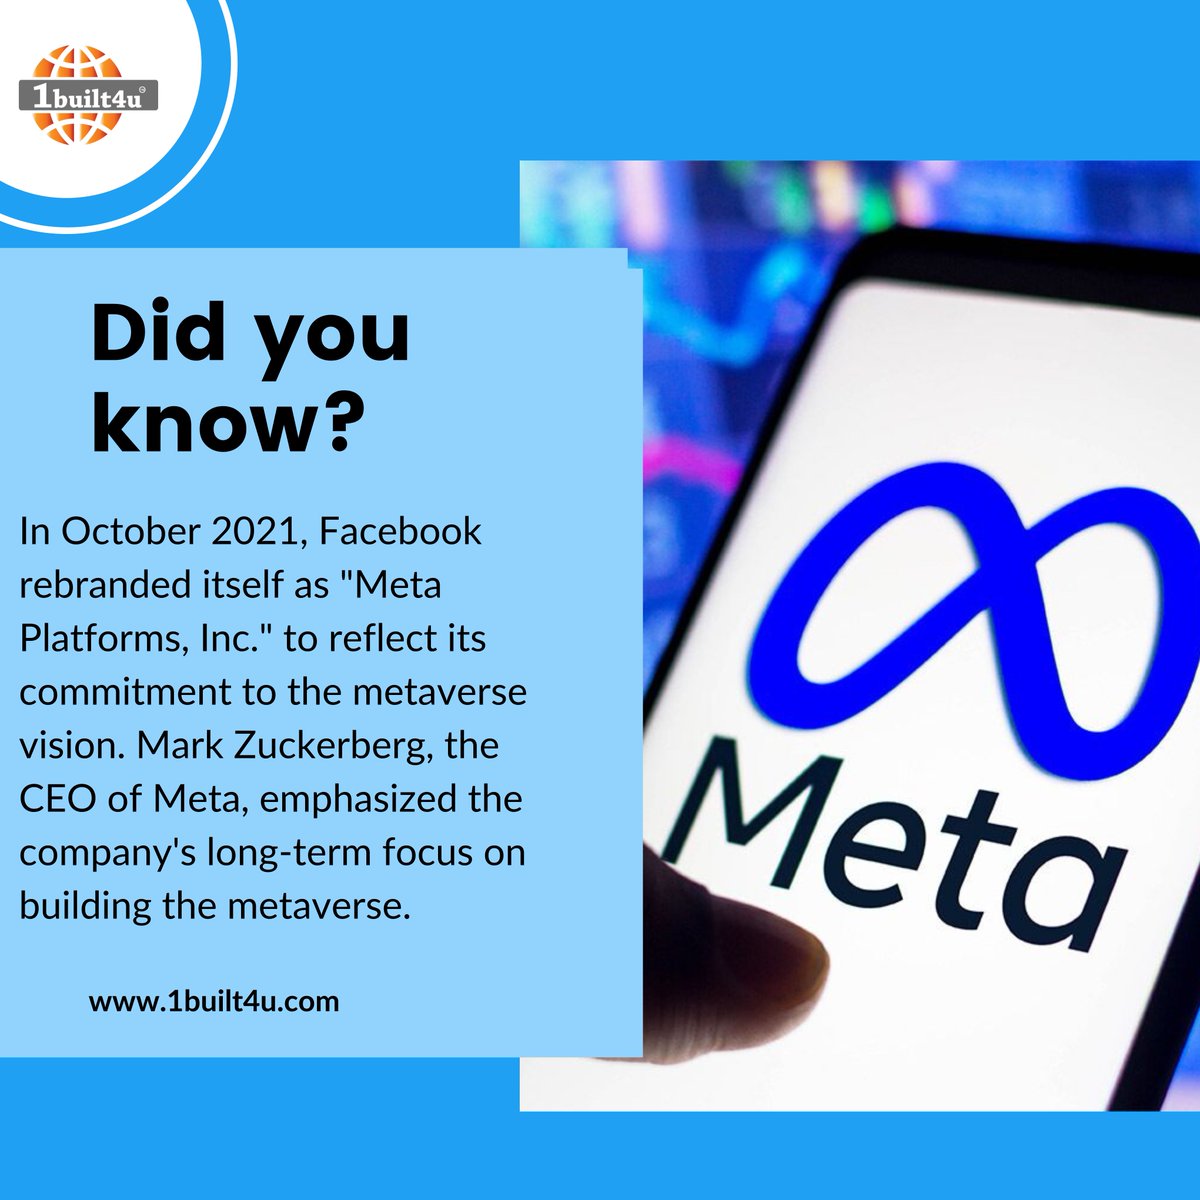 Did you know?

Explore intriguing insights! Dive into the digital age with 1built4udotcom's outstanding IT services. 🌐

#1built4udotcom
#1built4u
#didyouknow
#didyouknowfact
#MetaPlatforms
#MetaverseVision
#FacebookRebrand
#ZuckerbergVision
#MetaCEO
#MetaverseFocus